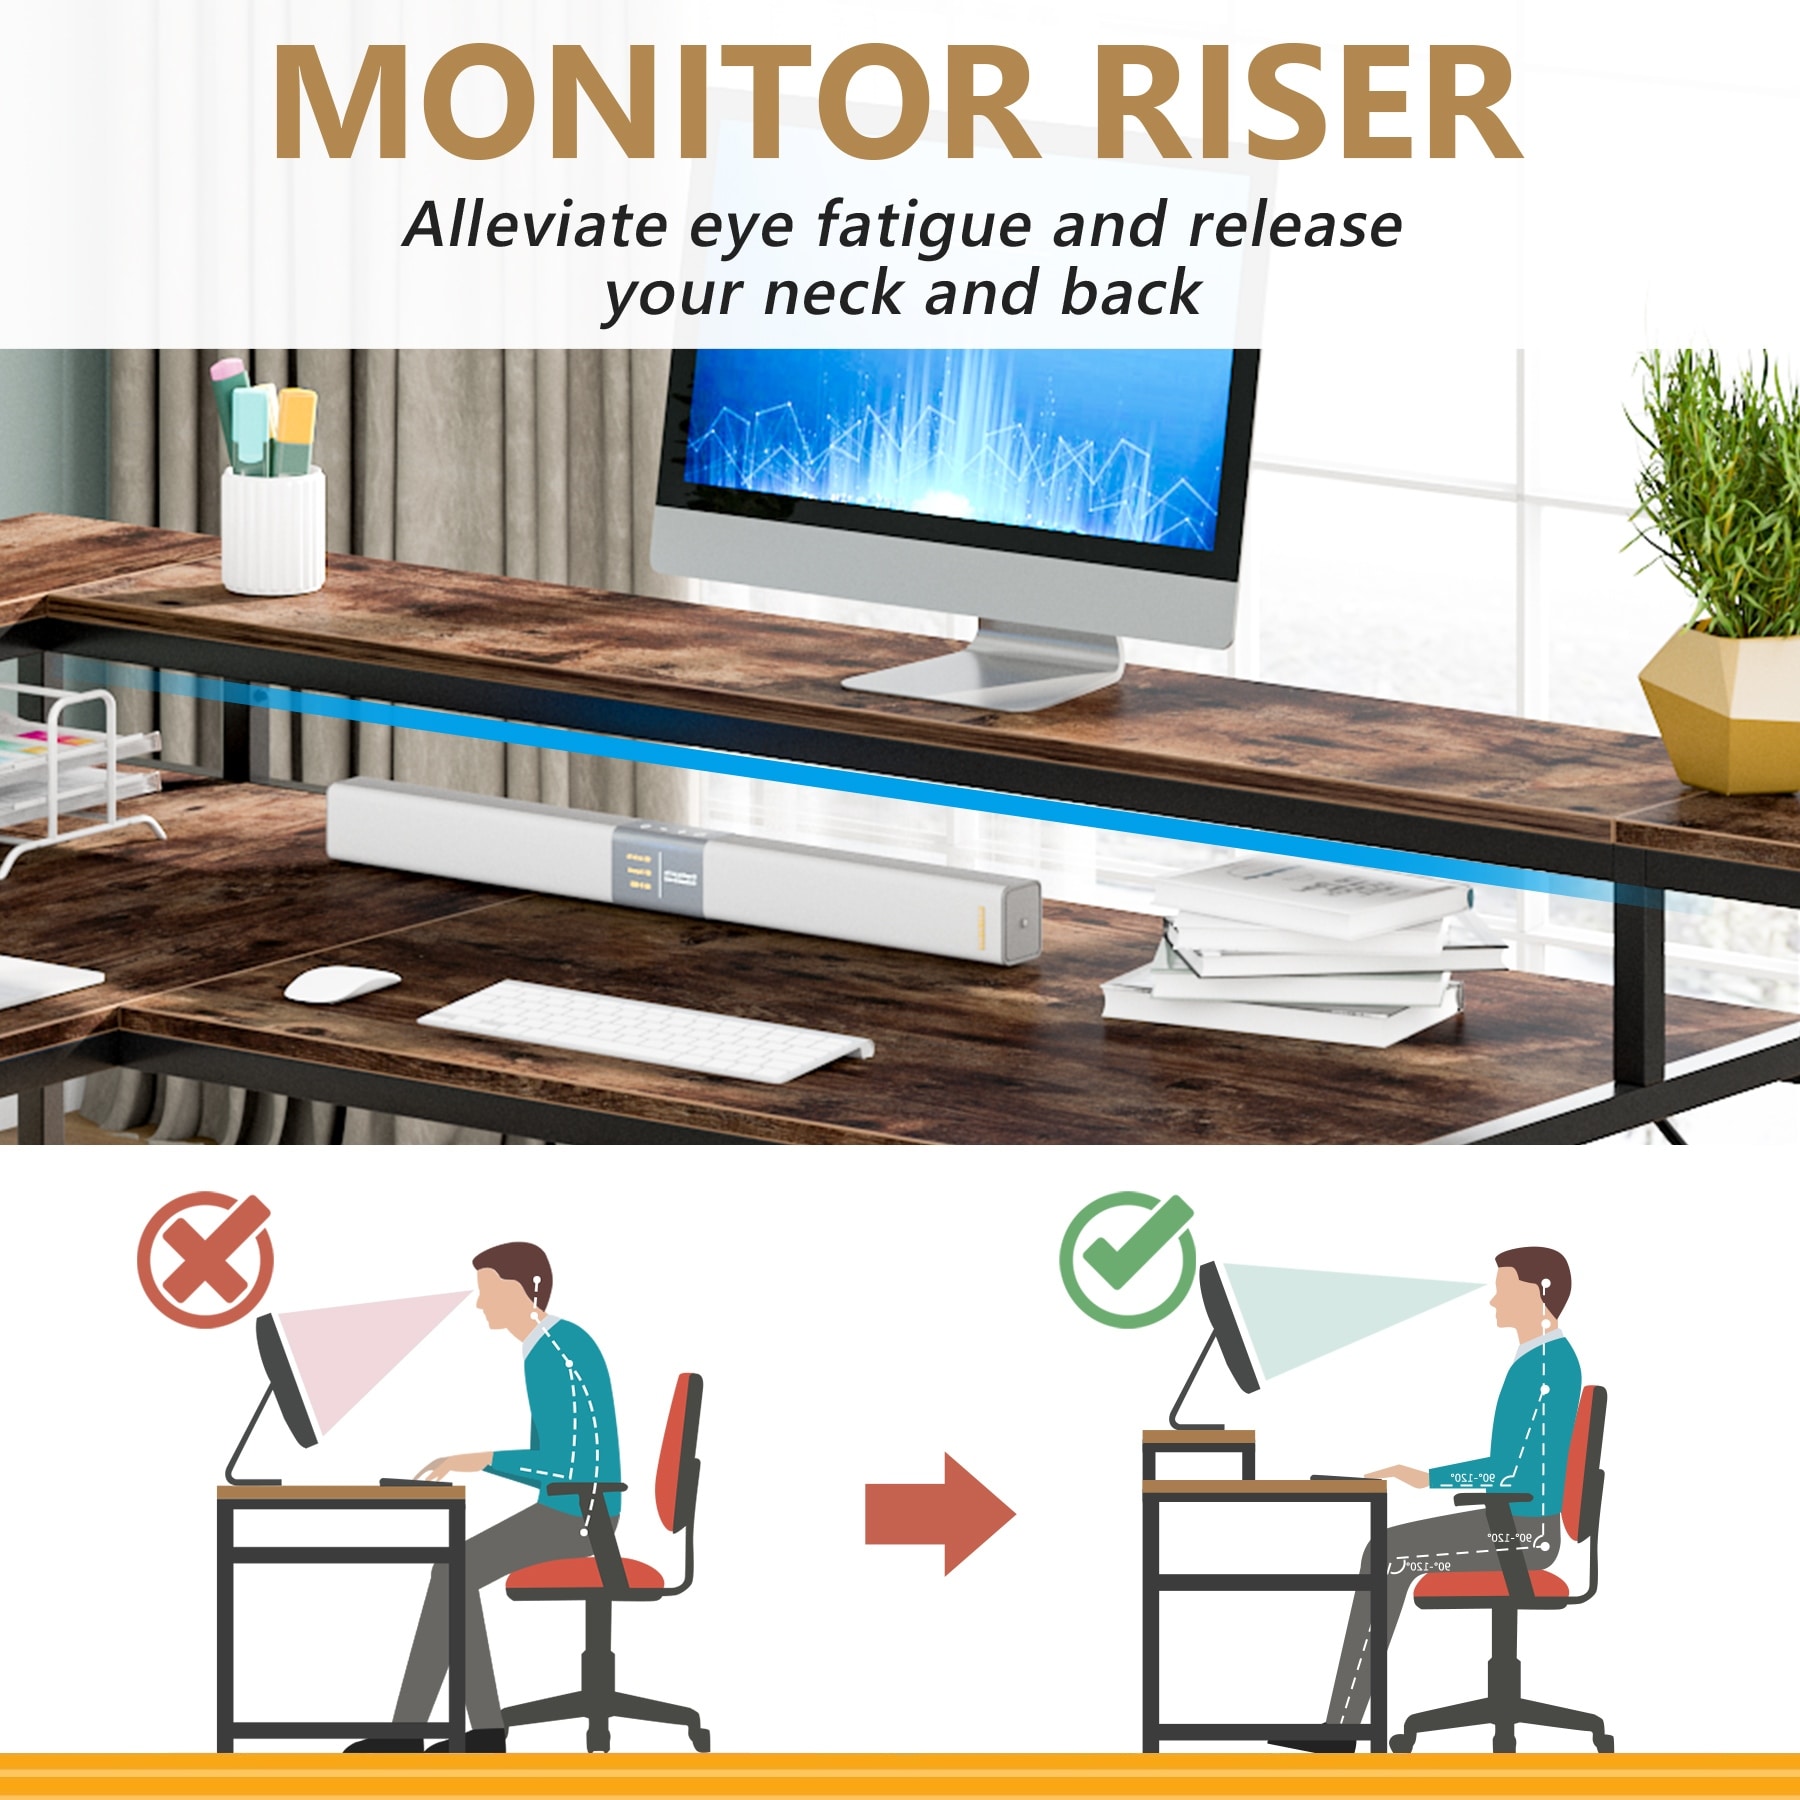 https://ak1.ostkcdn.com/images/products/is/images/direct/7d137755805db61bfbf78c41b6ef8db7c33a8289/69-Inch-L-Shaped-Desk-with-Monitor-Shelf%2C-Reversible-Corner-Desk-Industrial-Computer-Desk-for-Home-Office%2C-Rustic-Brown.jpg